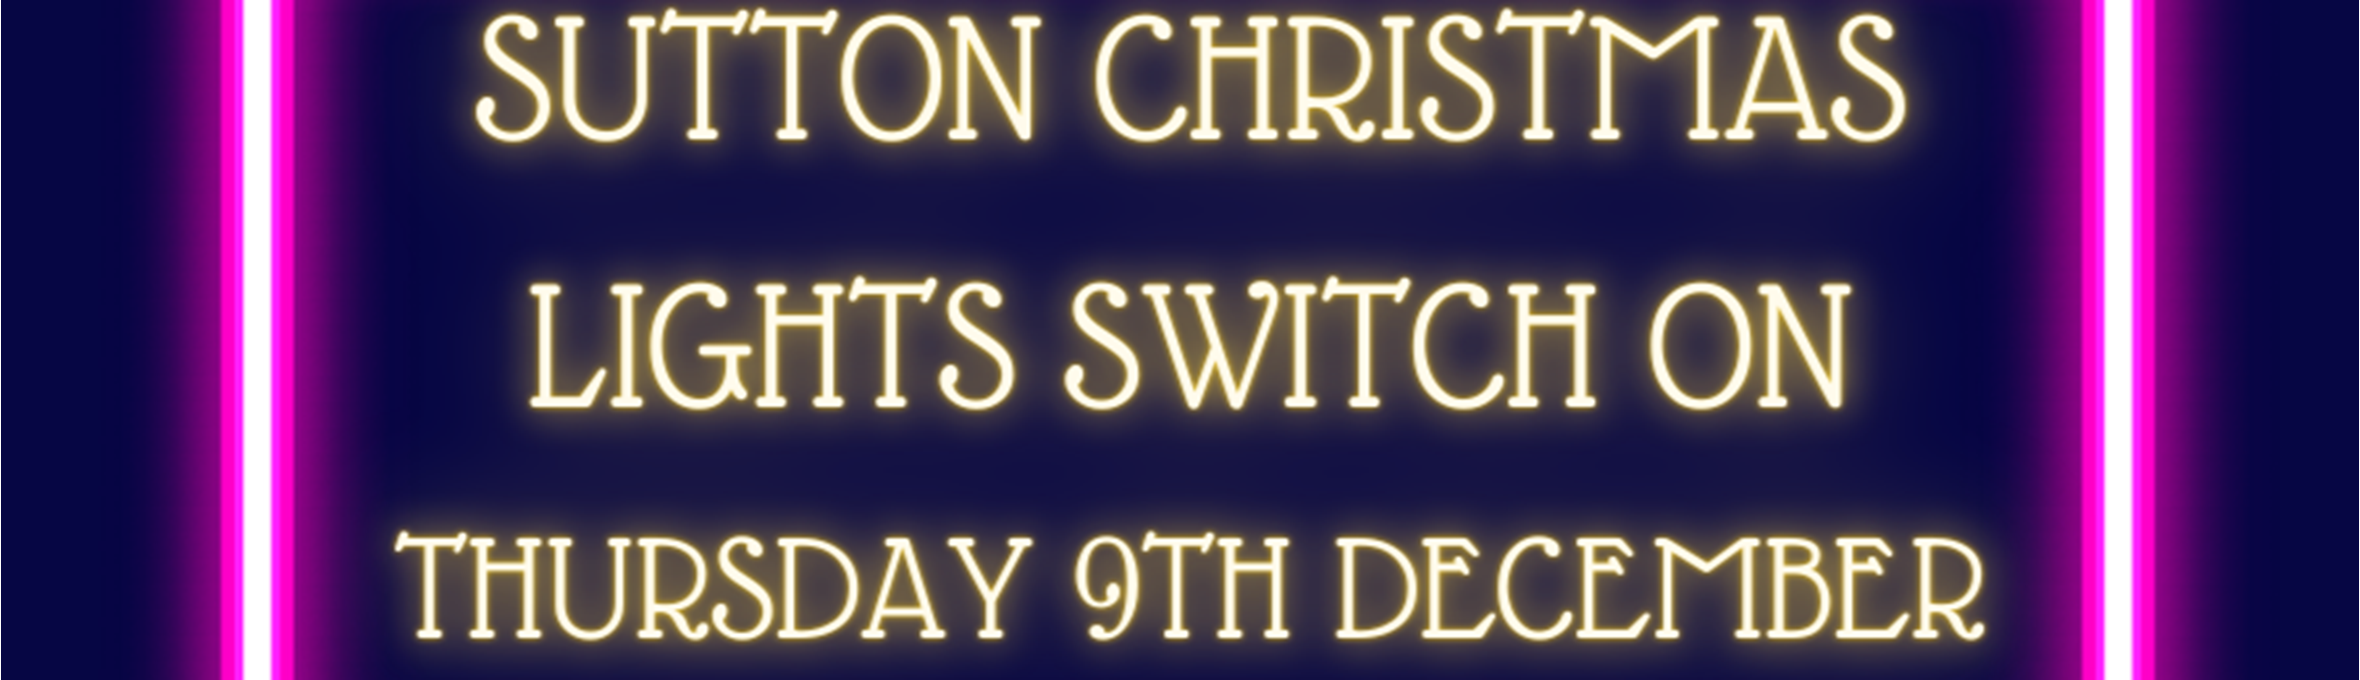 Sutton Christmas Lights Switch On